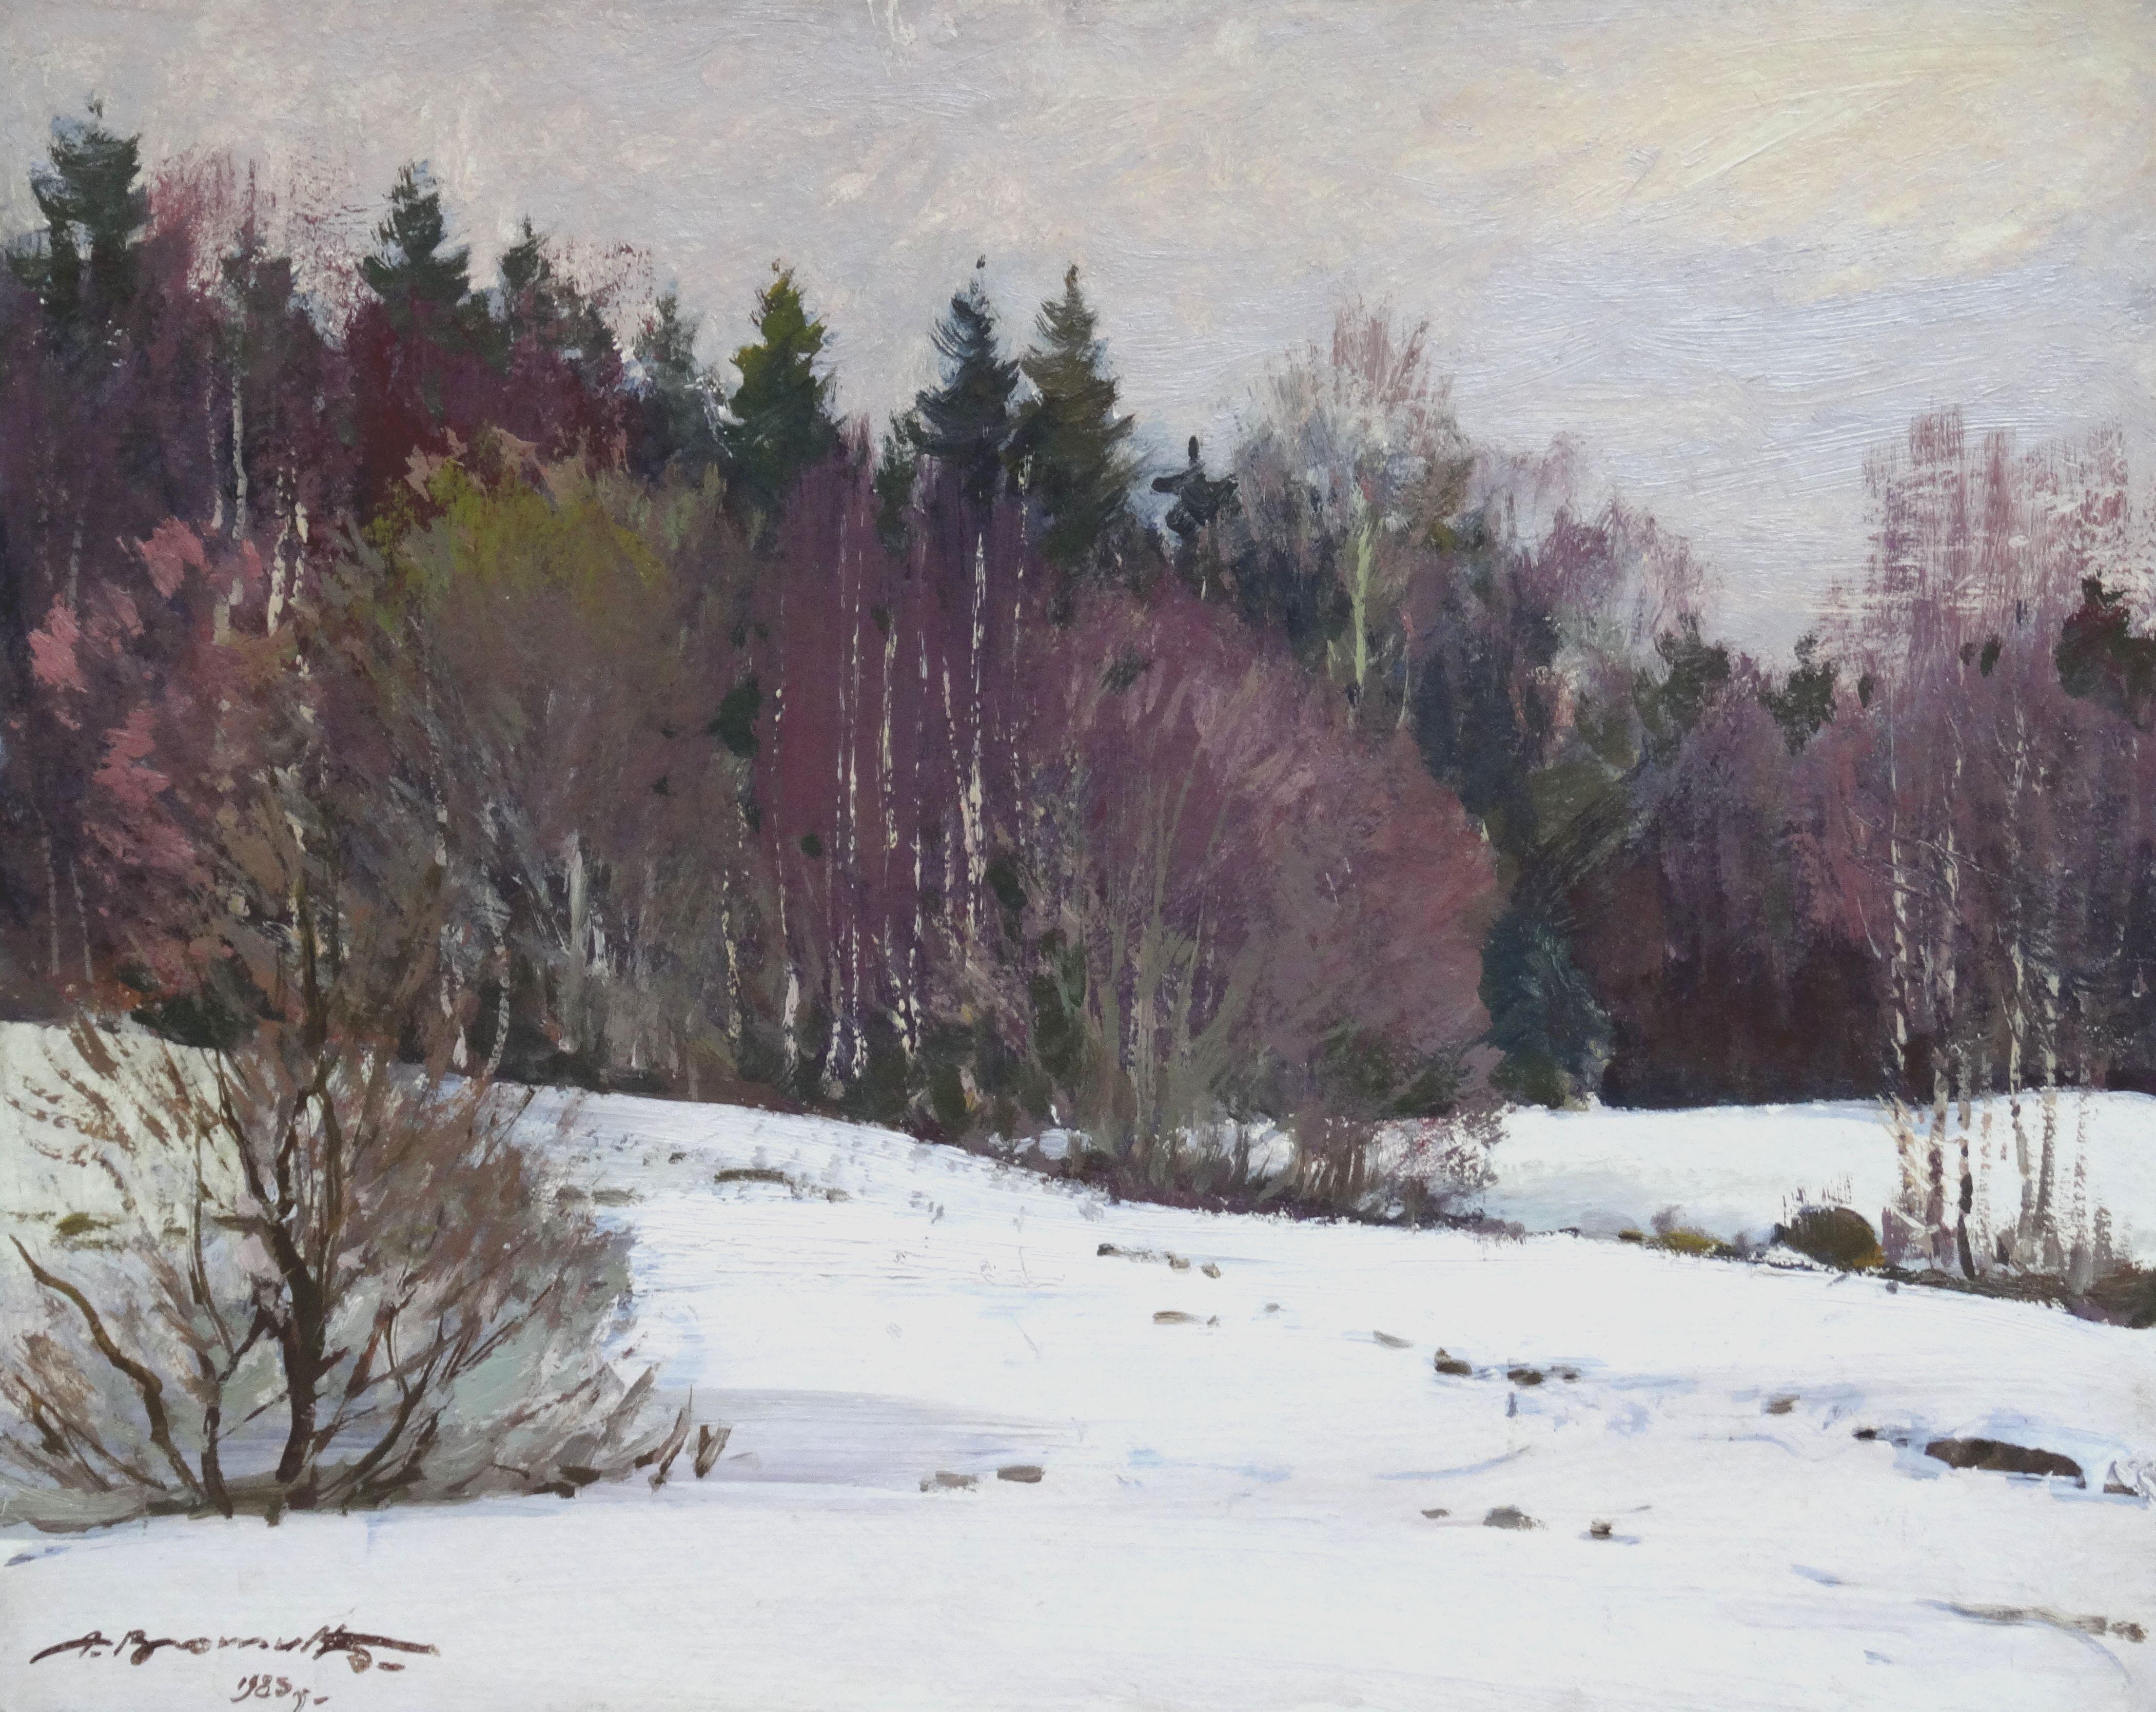 Forest edge at winter. 1983. Oil on cardboard, 40x50 cm